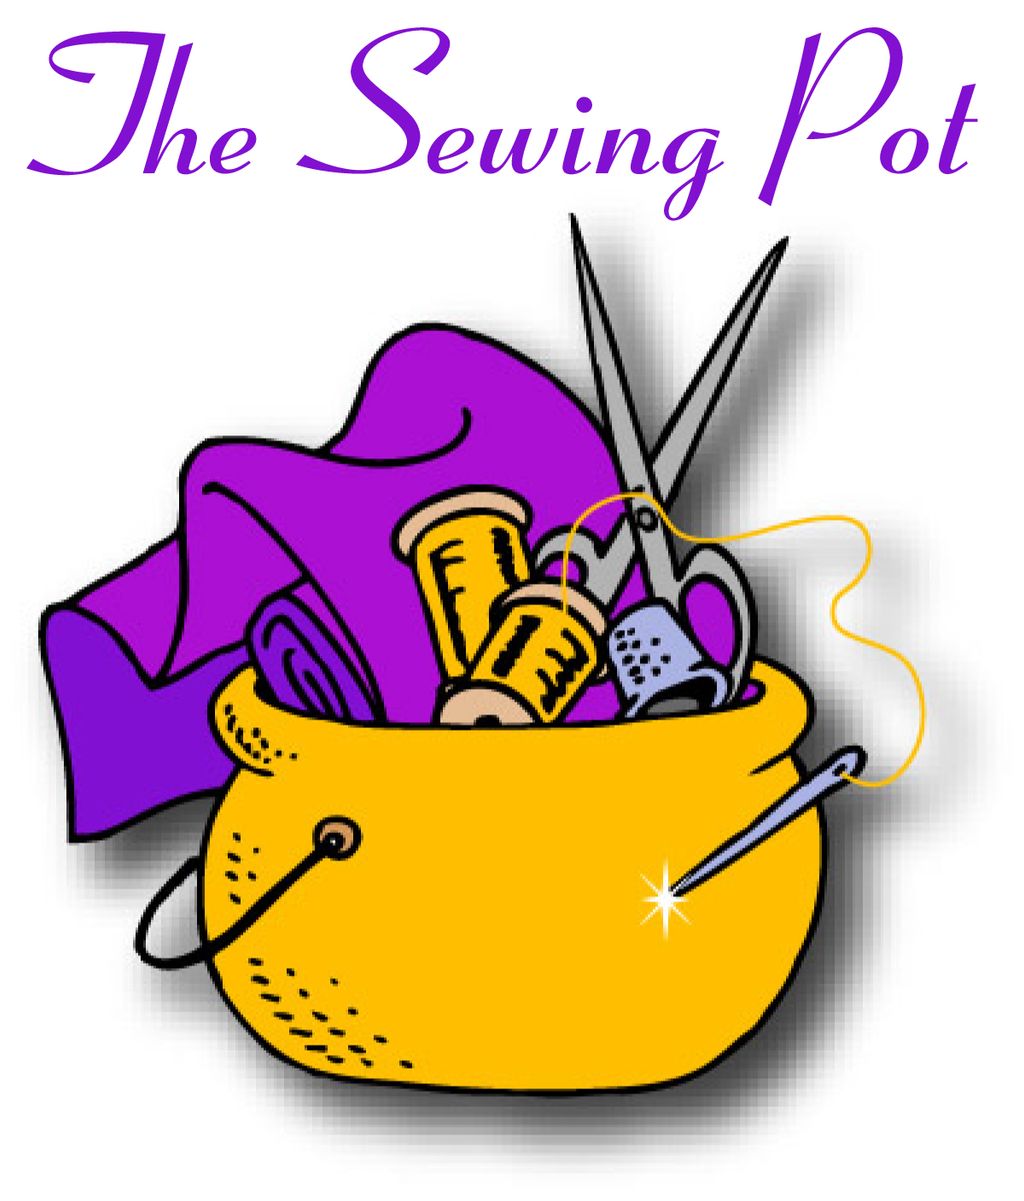 The Sewing Pot